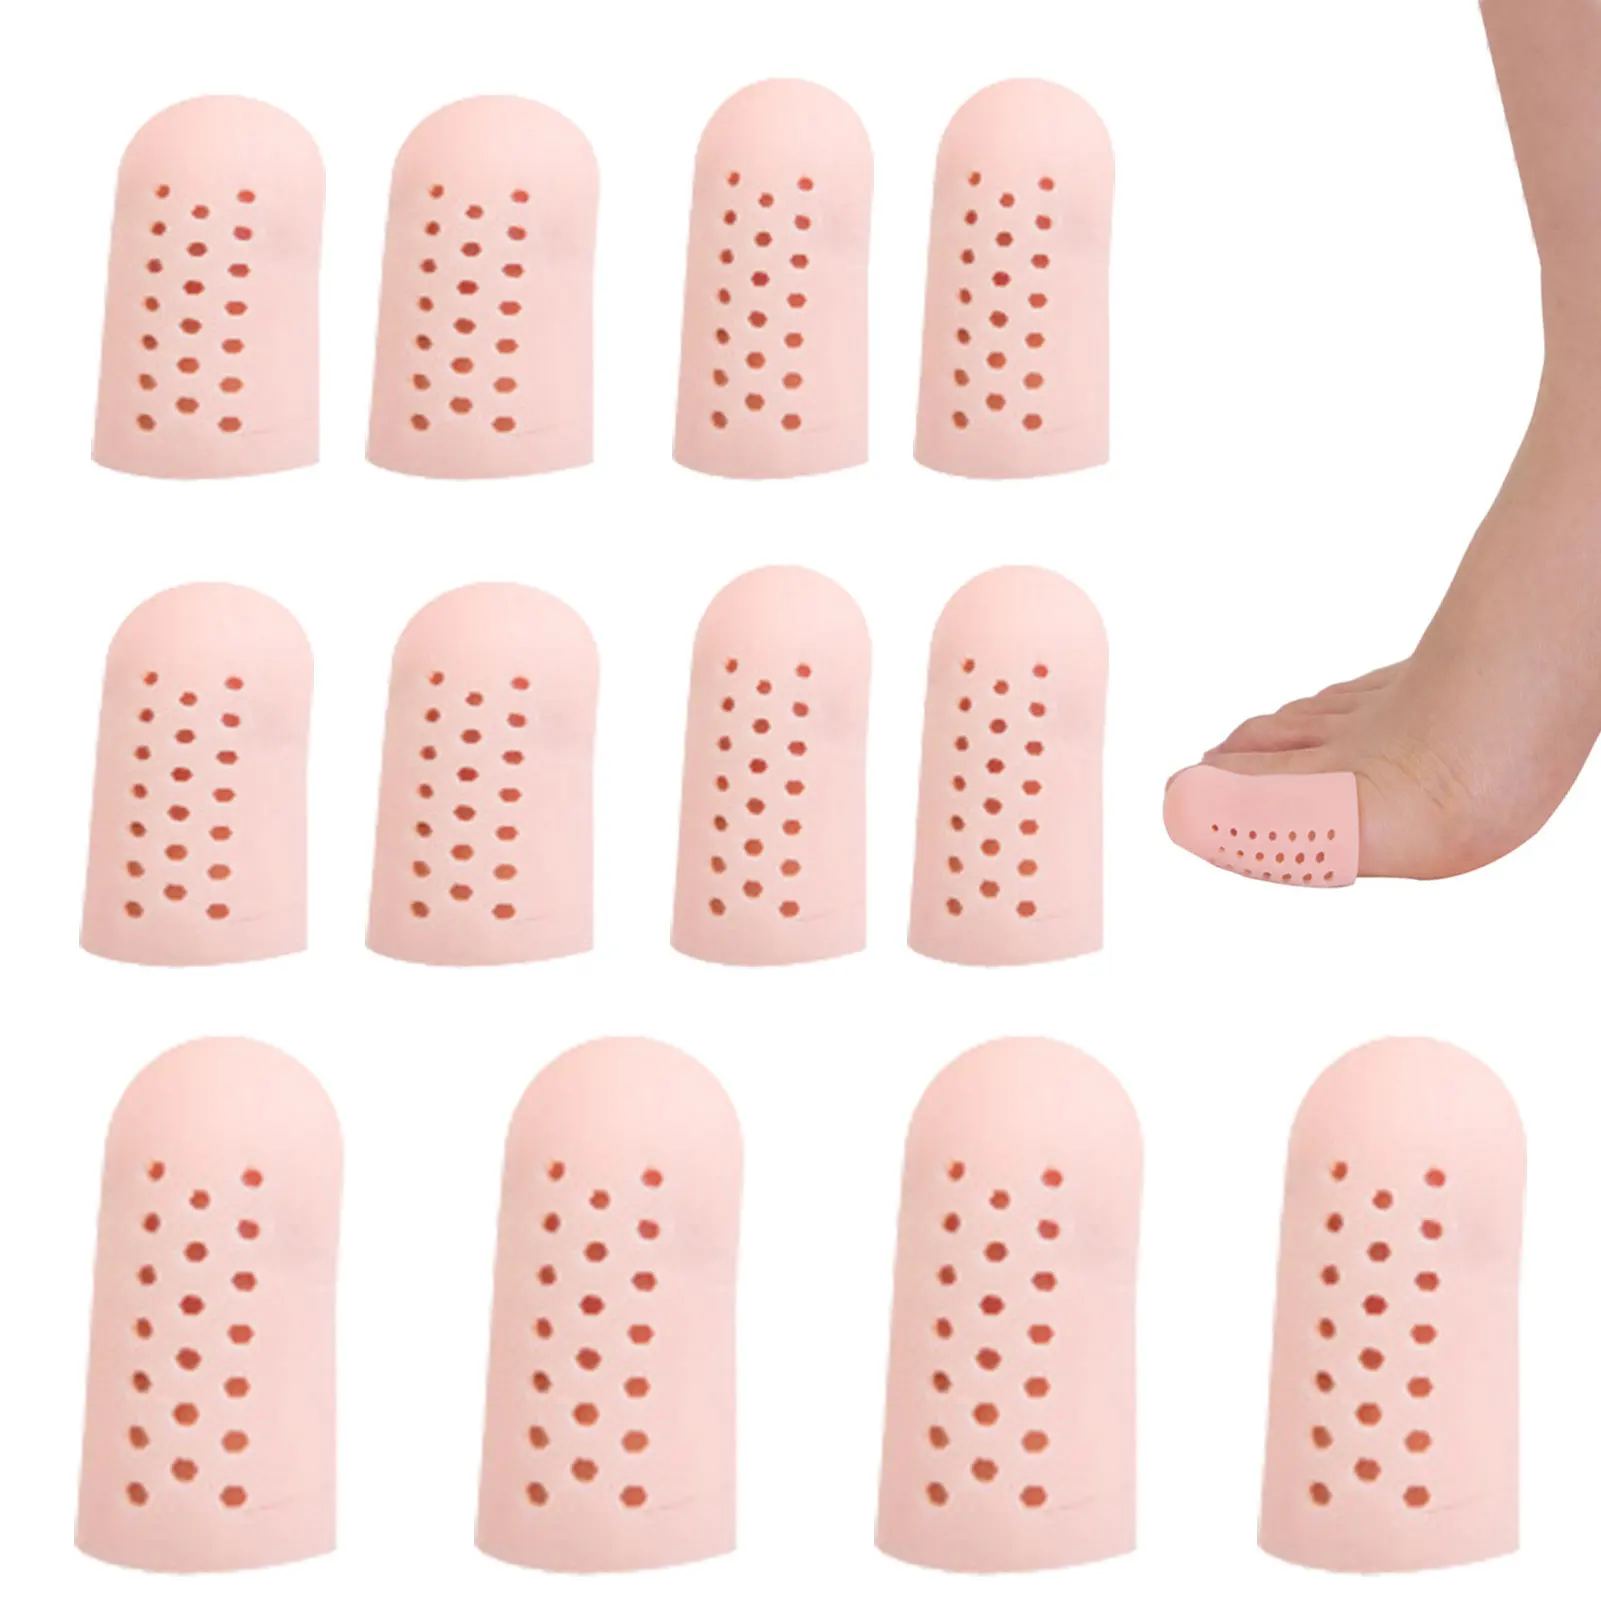 6pairs Elastic Toe Cap Protective Case Foot Care Bunion Pads Calluses Reusable Thicken Toenails Corns Breathing Hole Blisters